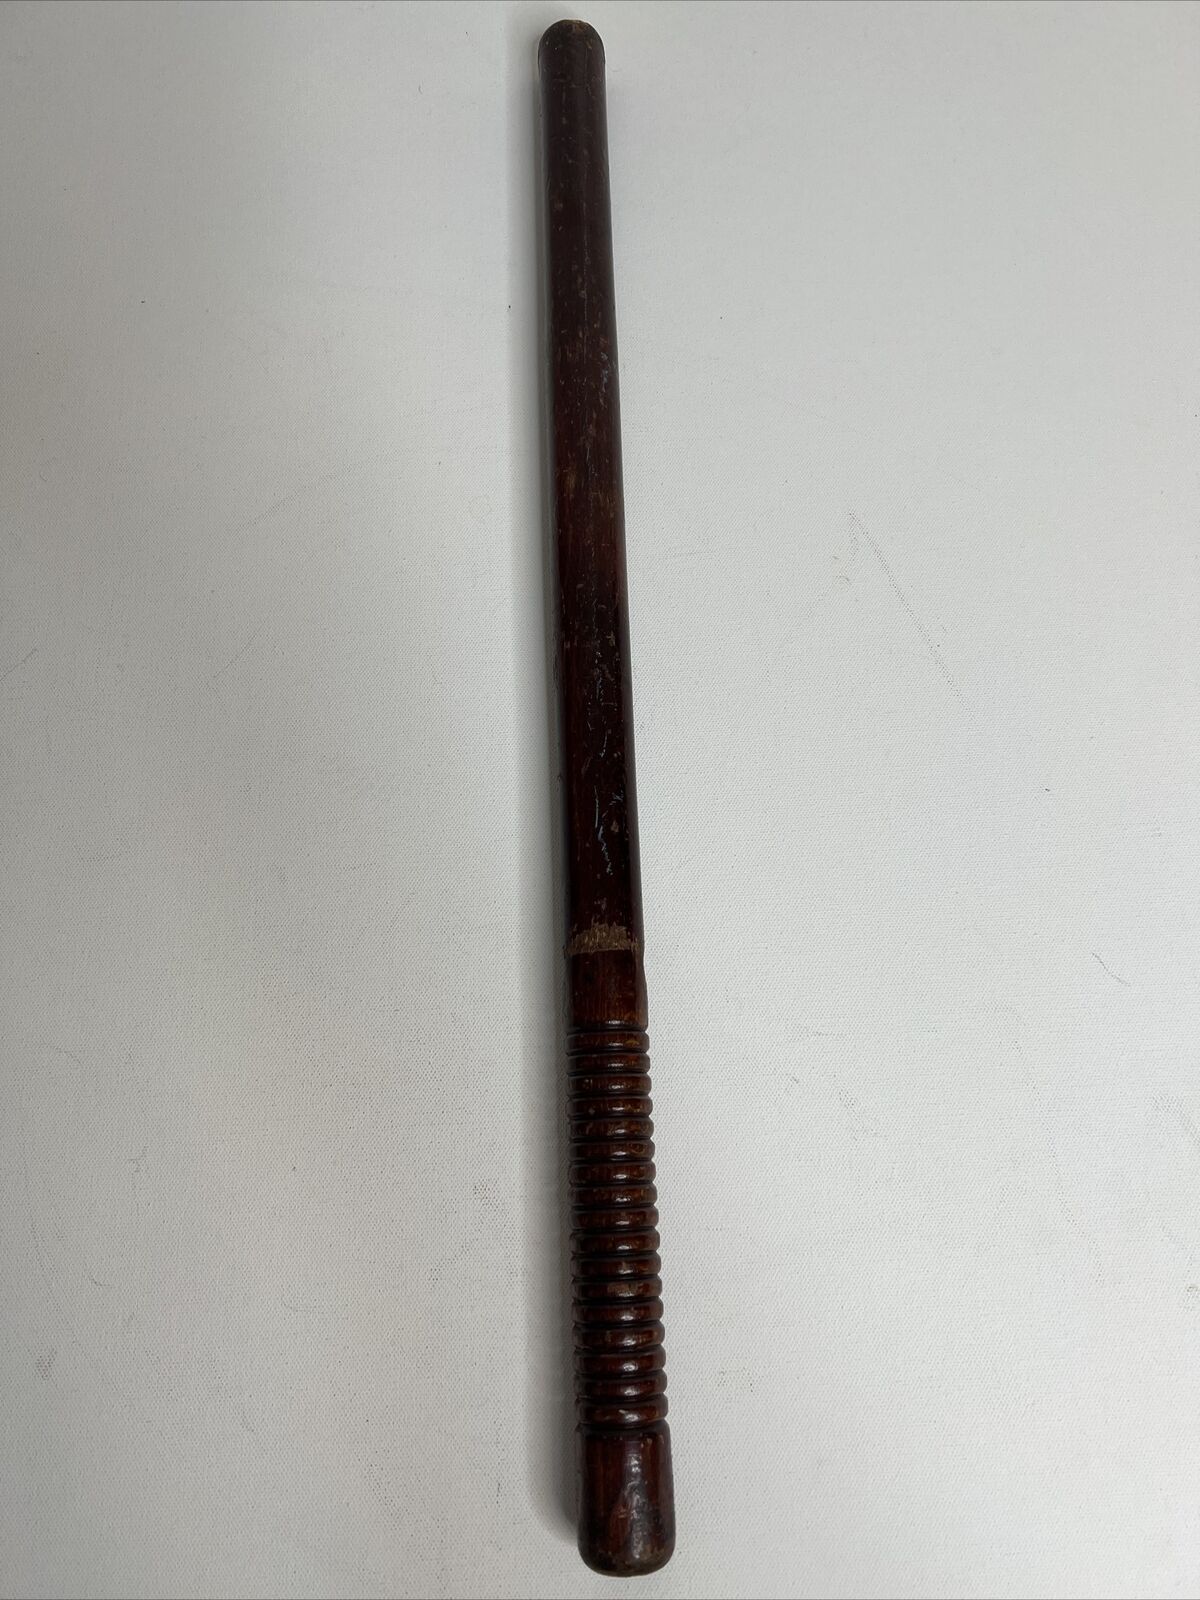 Vintage Wooden Police Baton 23-1/2 Inch Collectible Brown